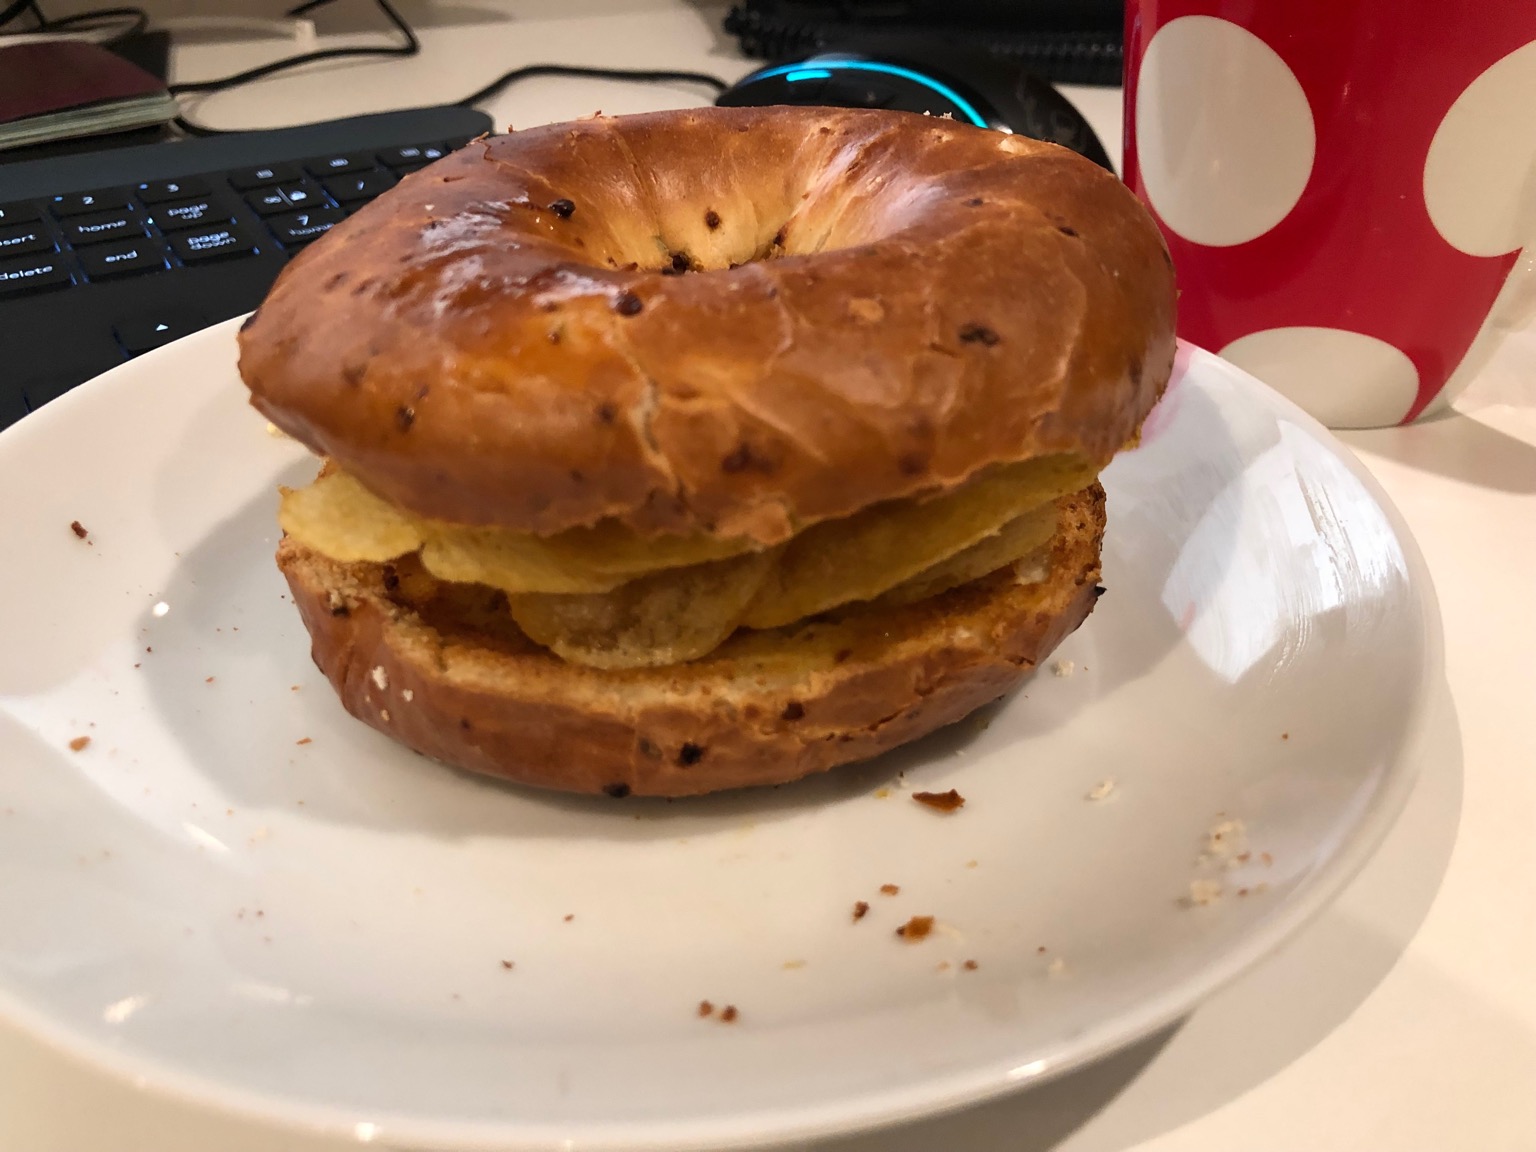 Potato crisps in a toasted bagel